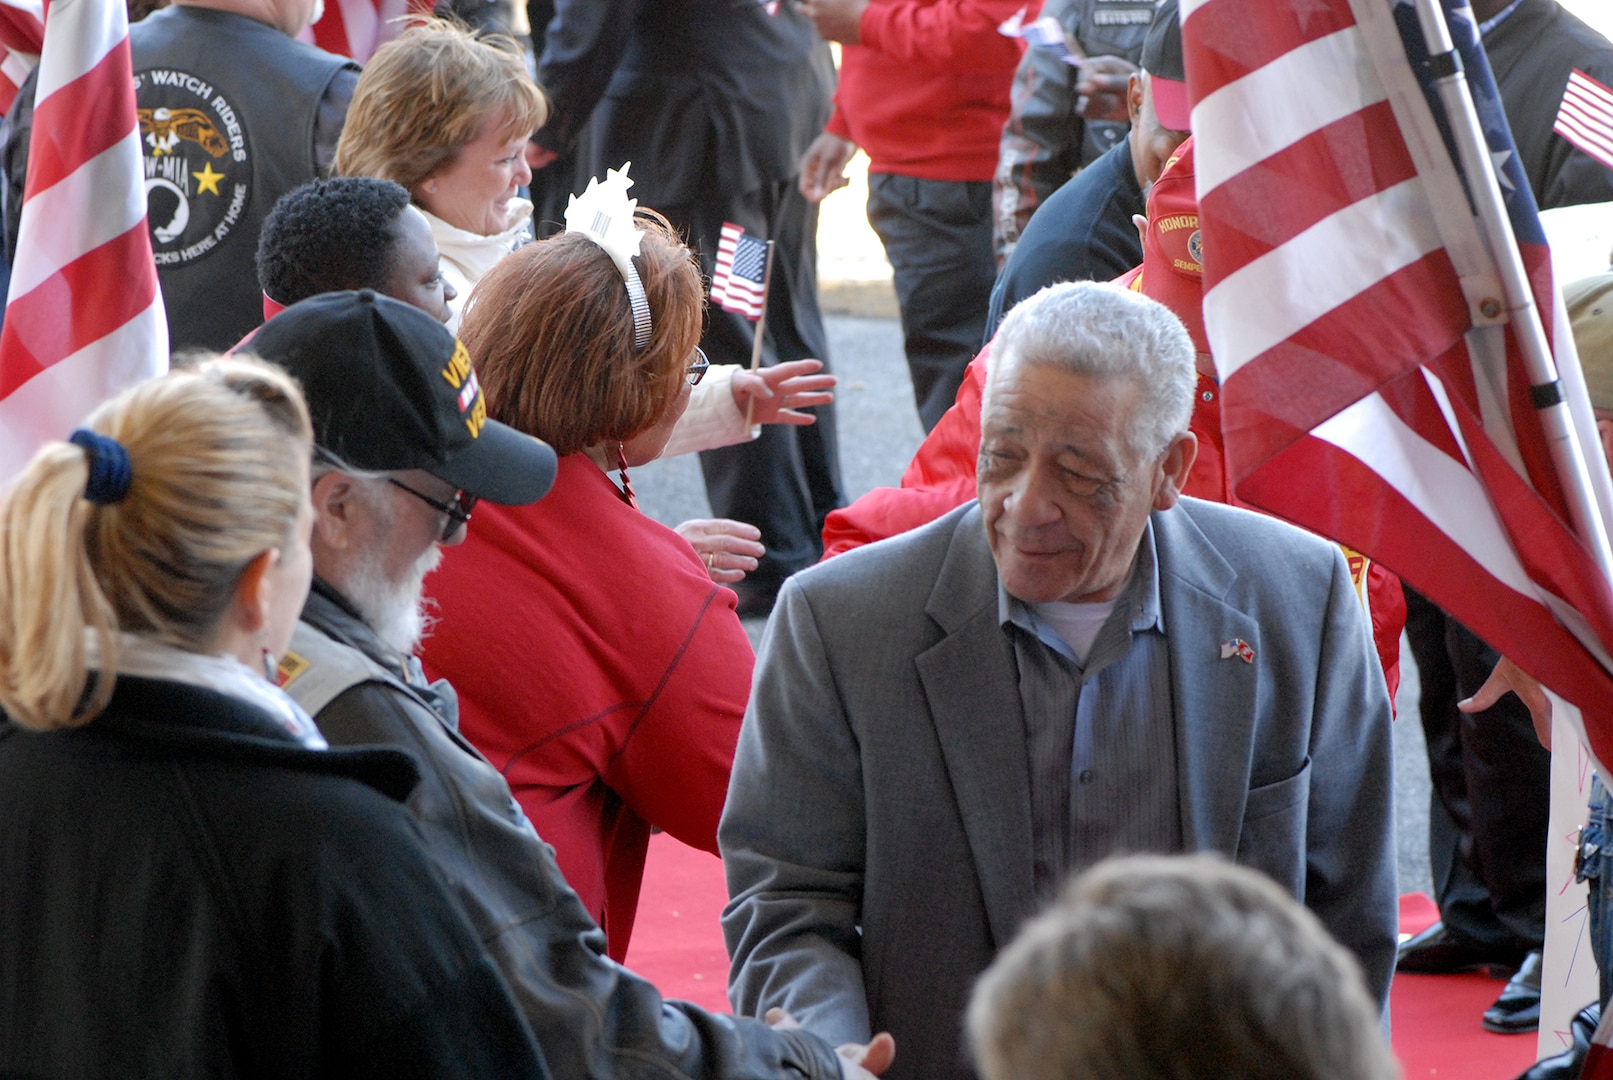 Vietnam War veterans are cheered on by volunteers as they parade down a red-carpet into a Vietnam War Commemoration program March 29, 2016 at the Pennsylvania National Guard Armory in Philadelphia, PA. More than 400 Vietnam War era veterans attended the event sponsored by the Association of the United States Army and Vietnam War Commemoration partners Defense Logistics Agency Troop Support and the Corporal Michael J. Crescenz Veterans Affairs Medical Center.